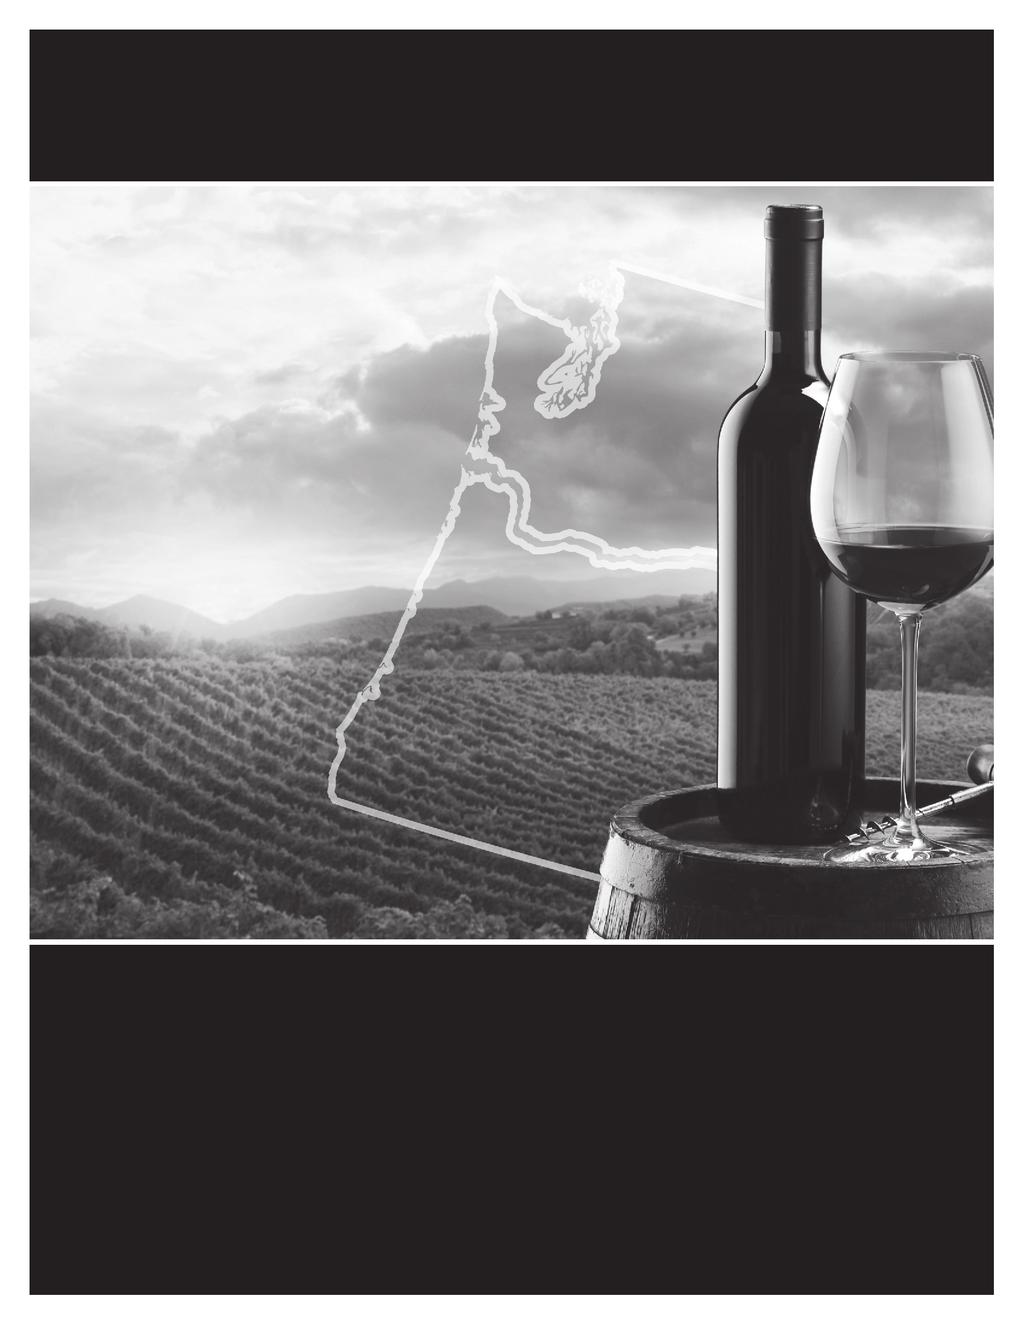 WASHINGTON WINE PRICE BOOK January-March 2019 Maletis Beverage is a local, family owned beverage distributor committed to providing the highest quality of service and products.